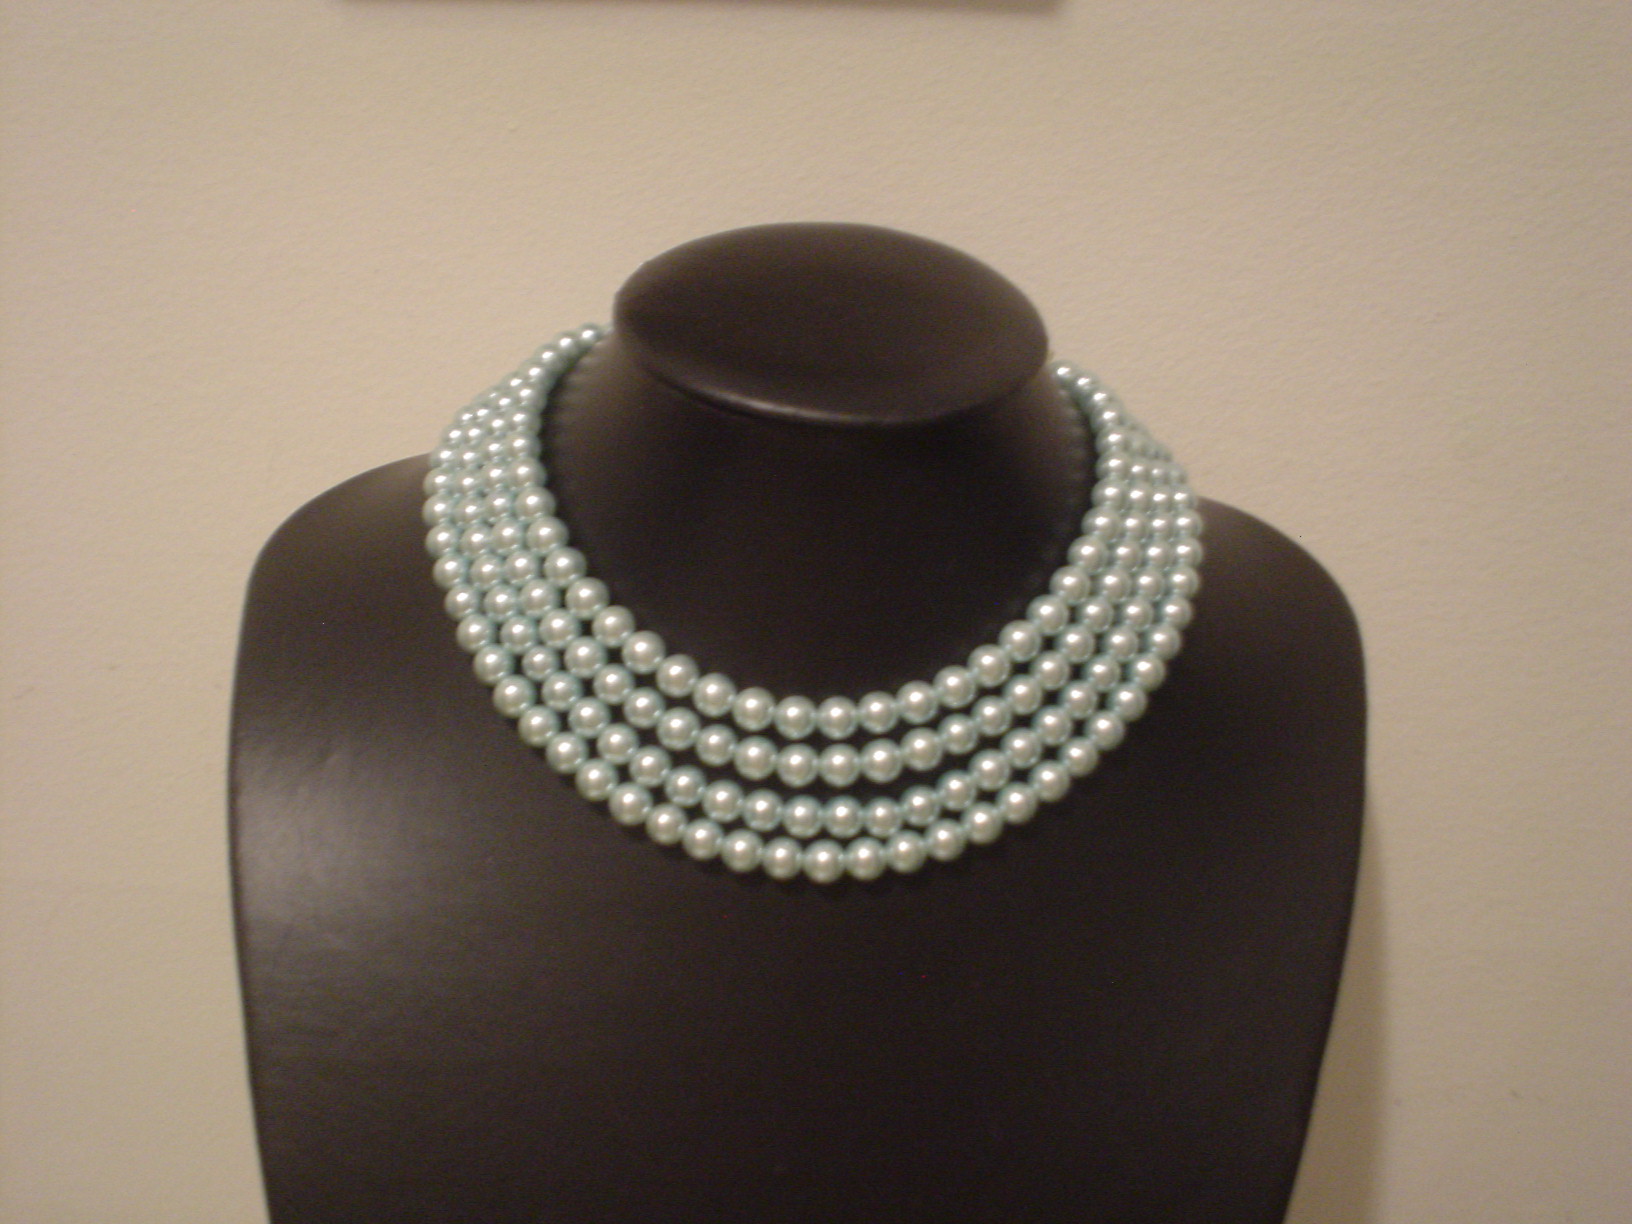 Woolworth necklace